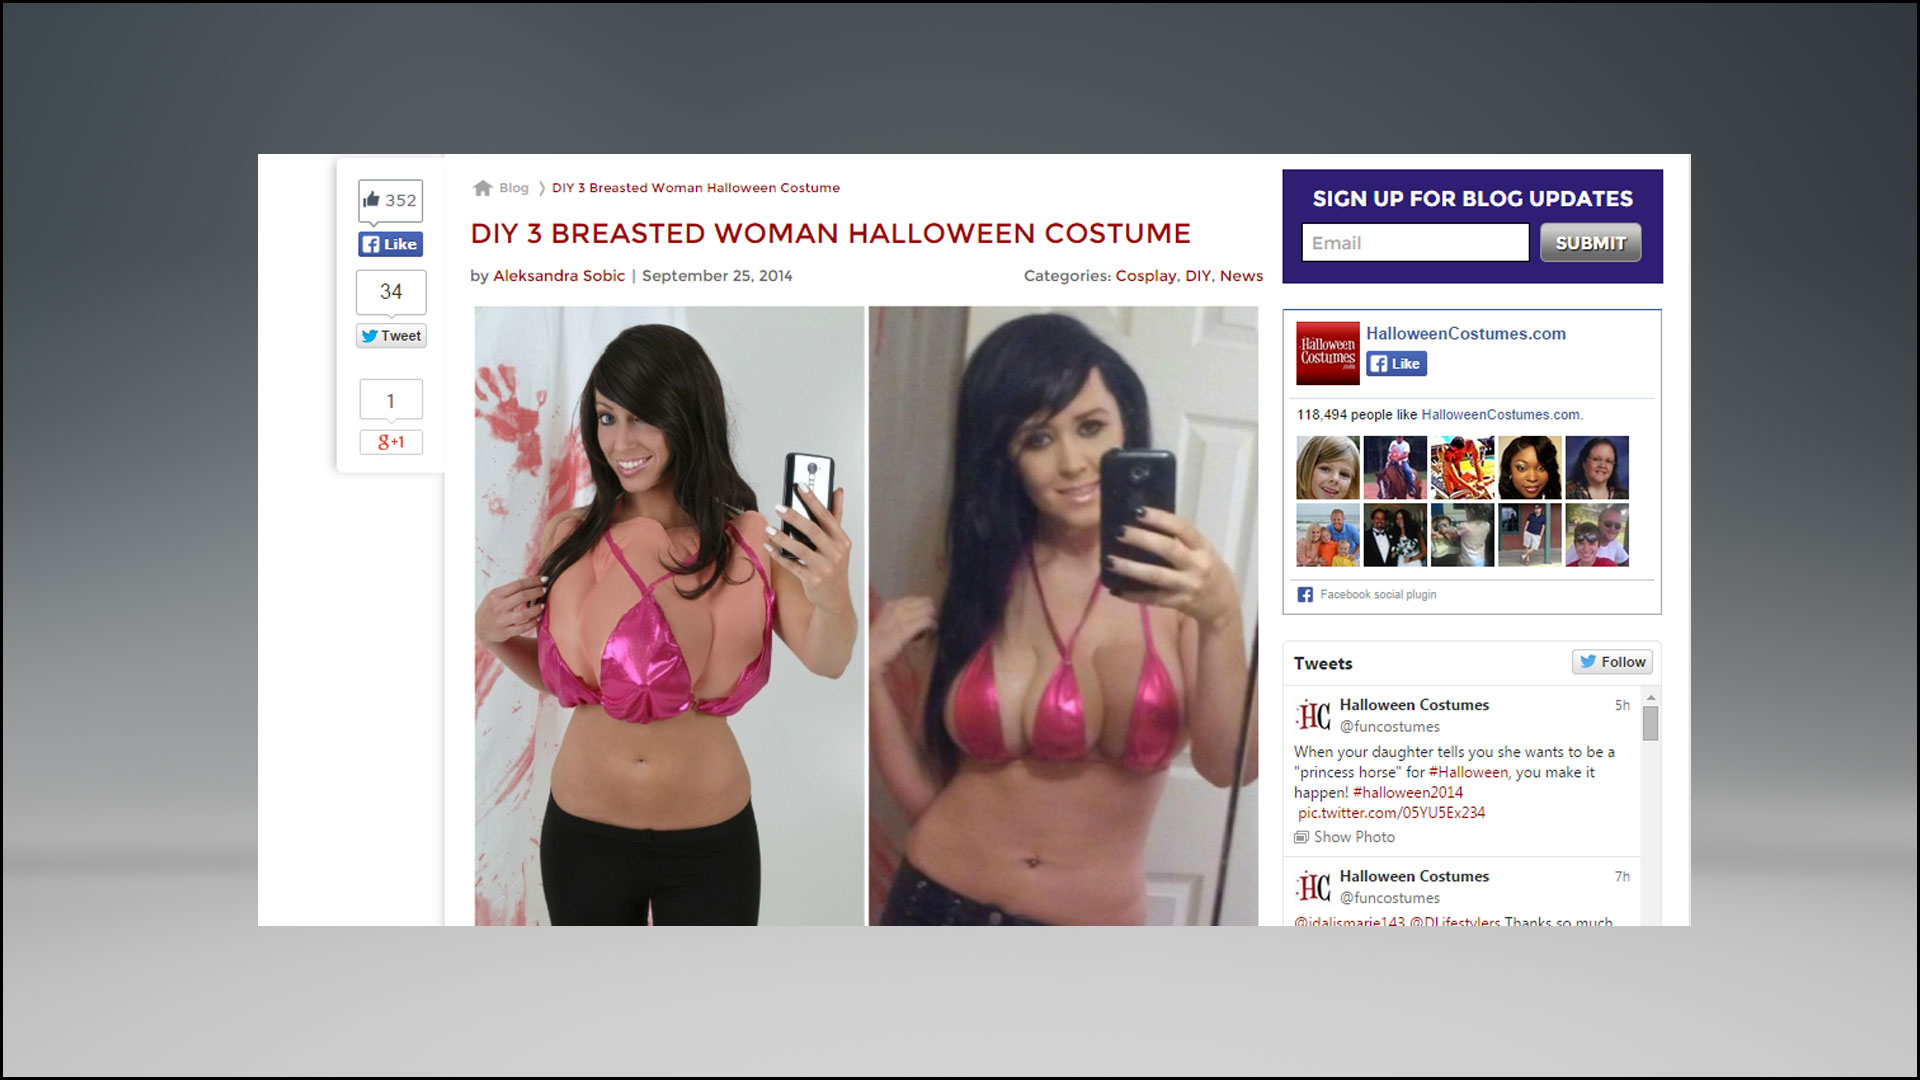 Yes! You Can Have 3 Breasts! For Halloween!